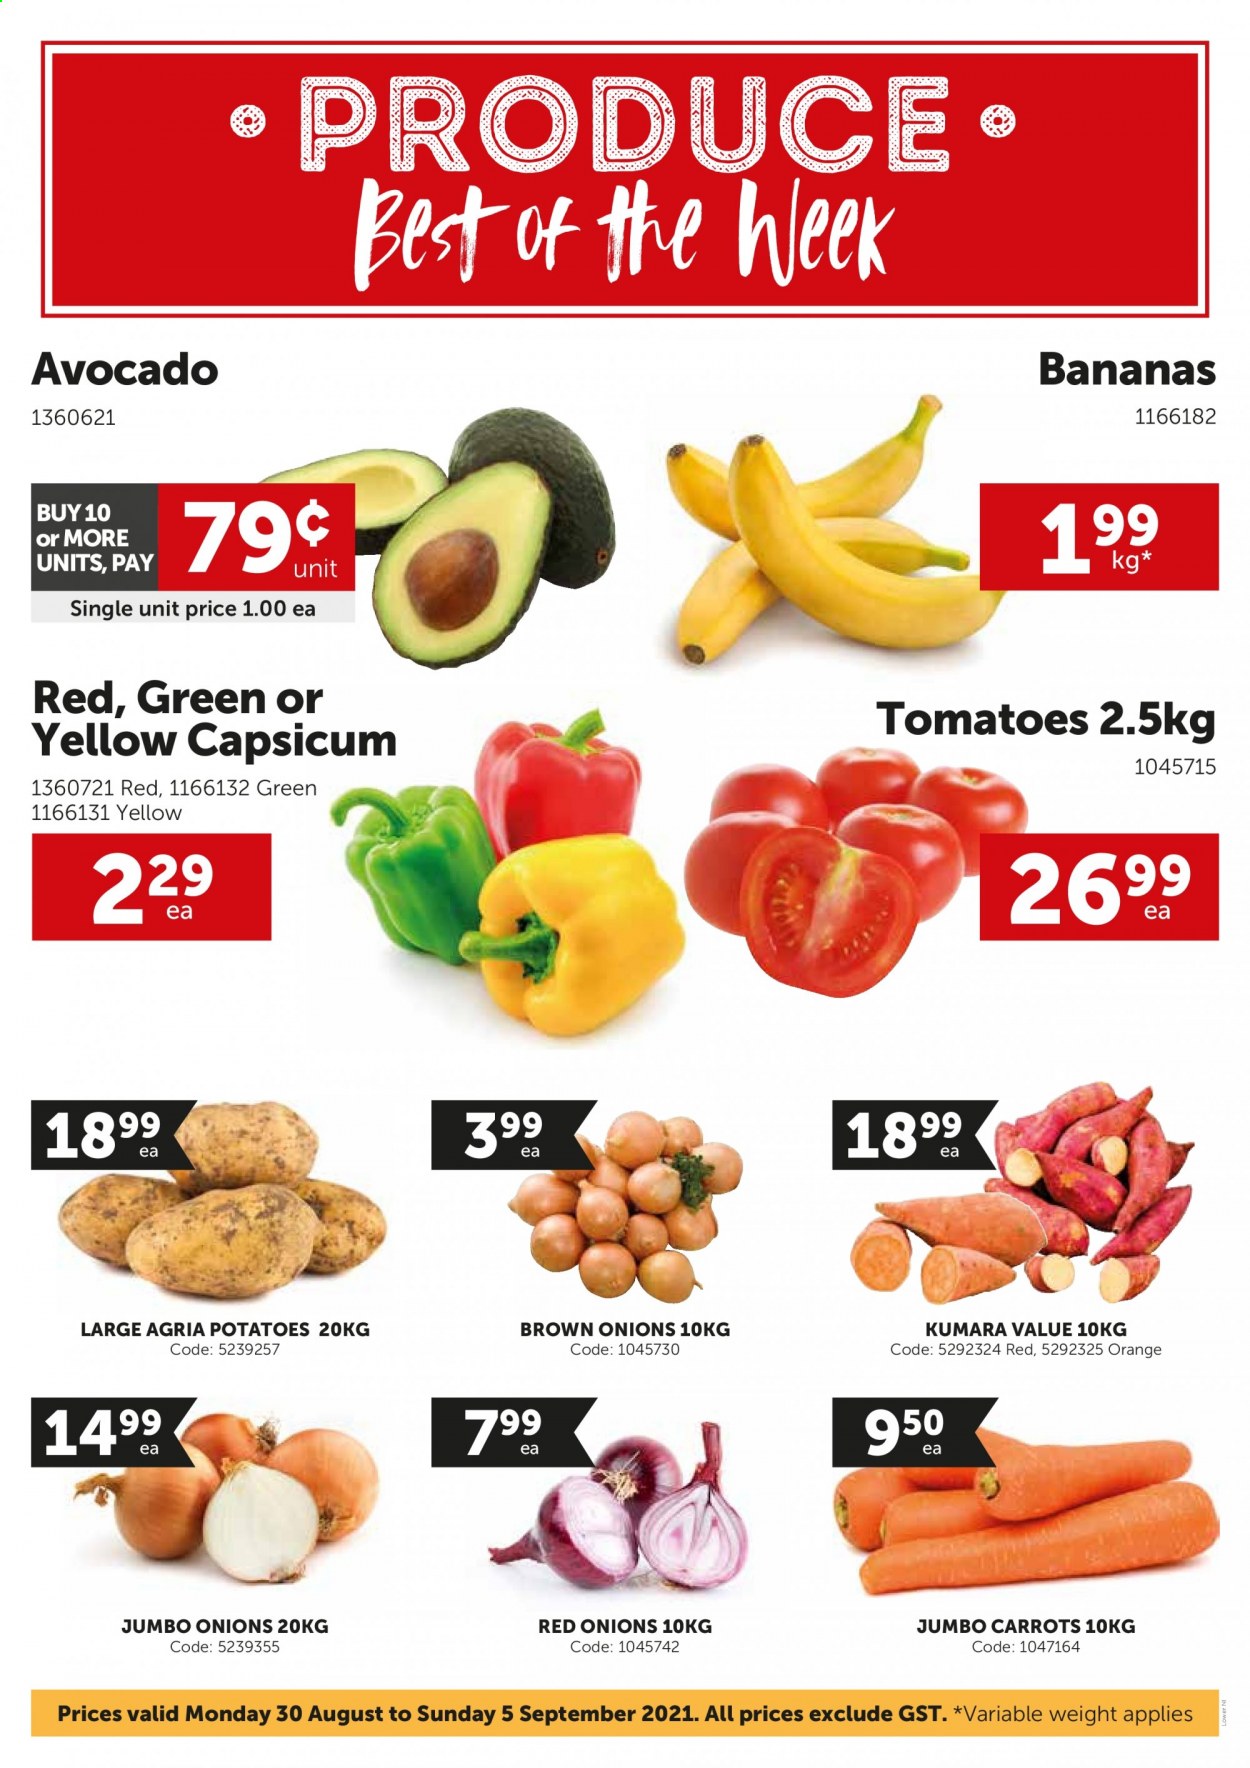 thumbnail - Gilmours mailer - 30.08.2021 - 05.09.2021 - Sales products - carrots, red onions, tomatoes, potatoes, onion, capsicum, avocado, bananas, oranges. Page 1.